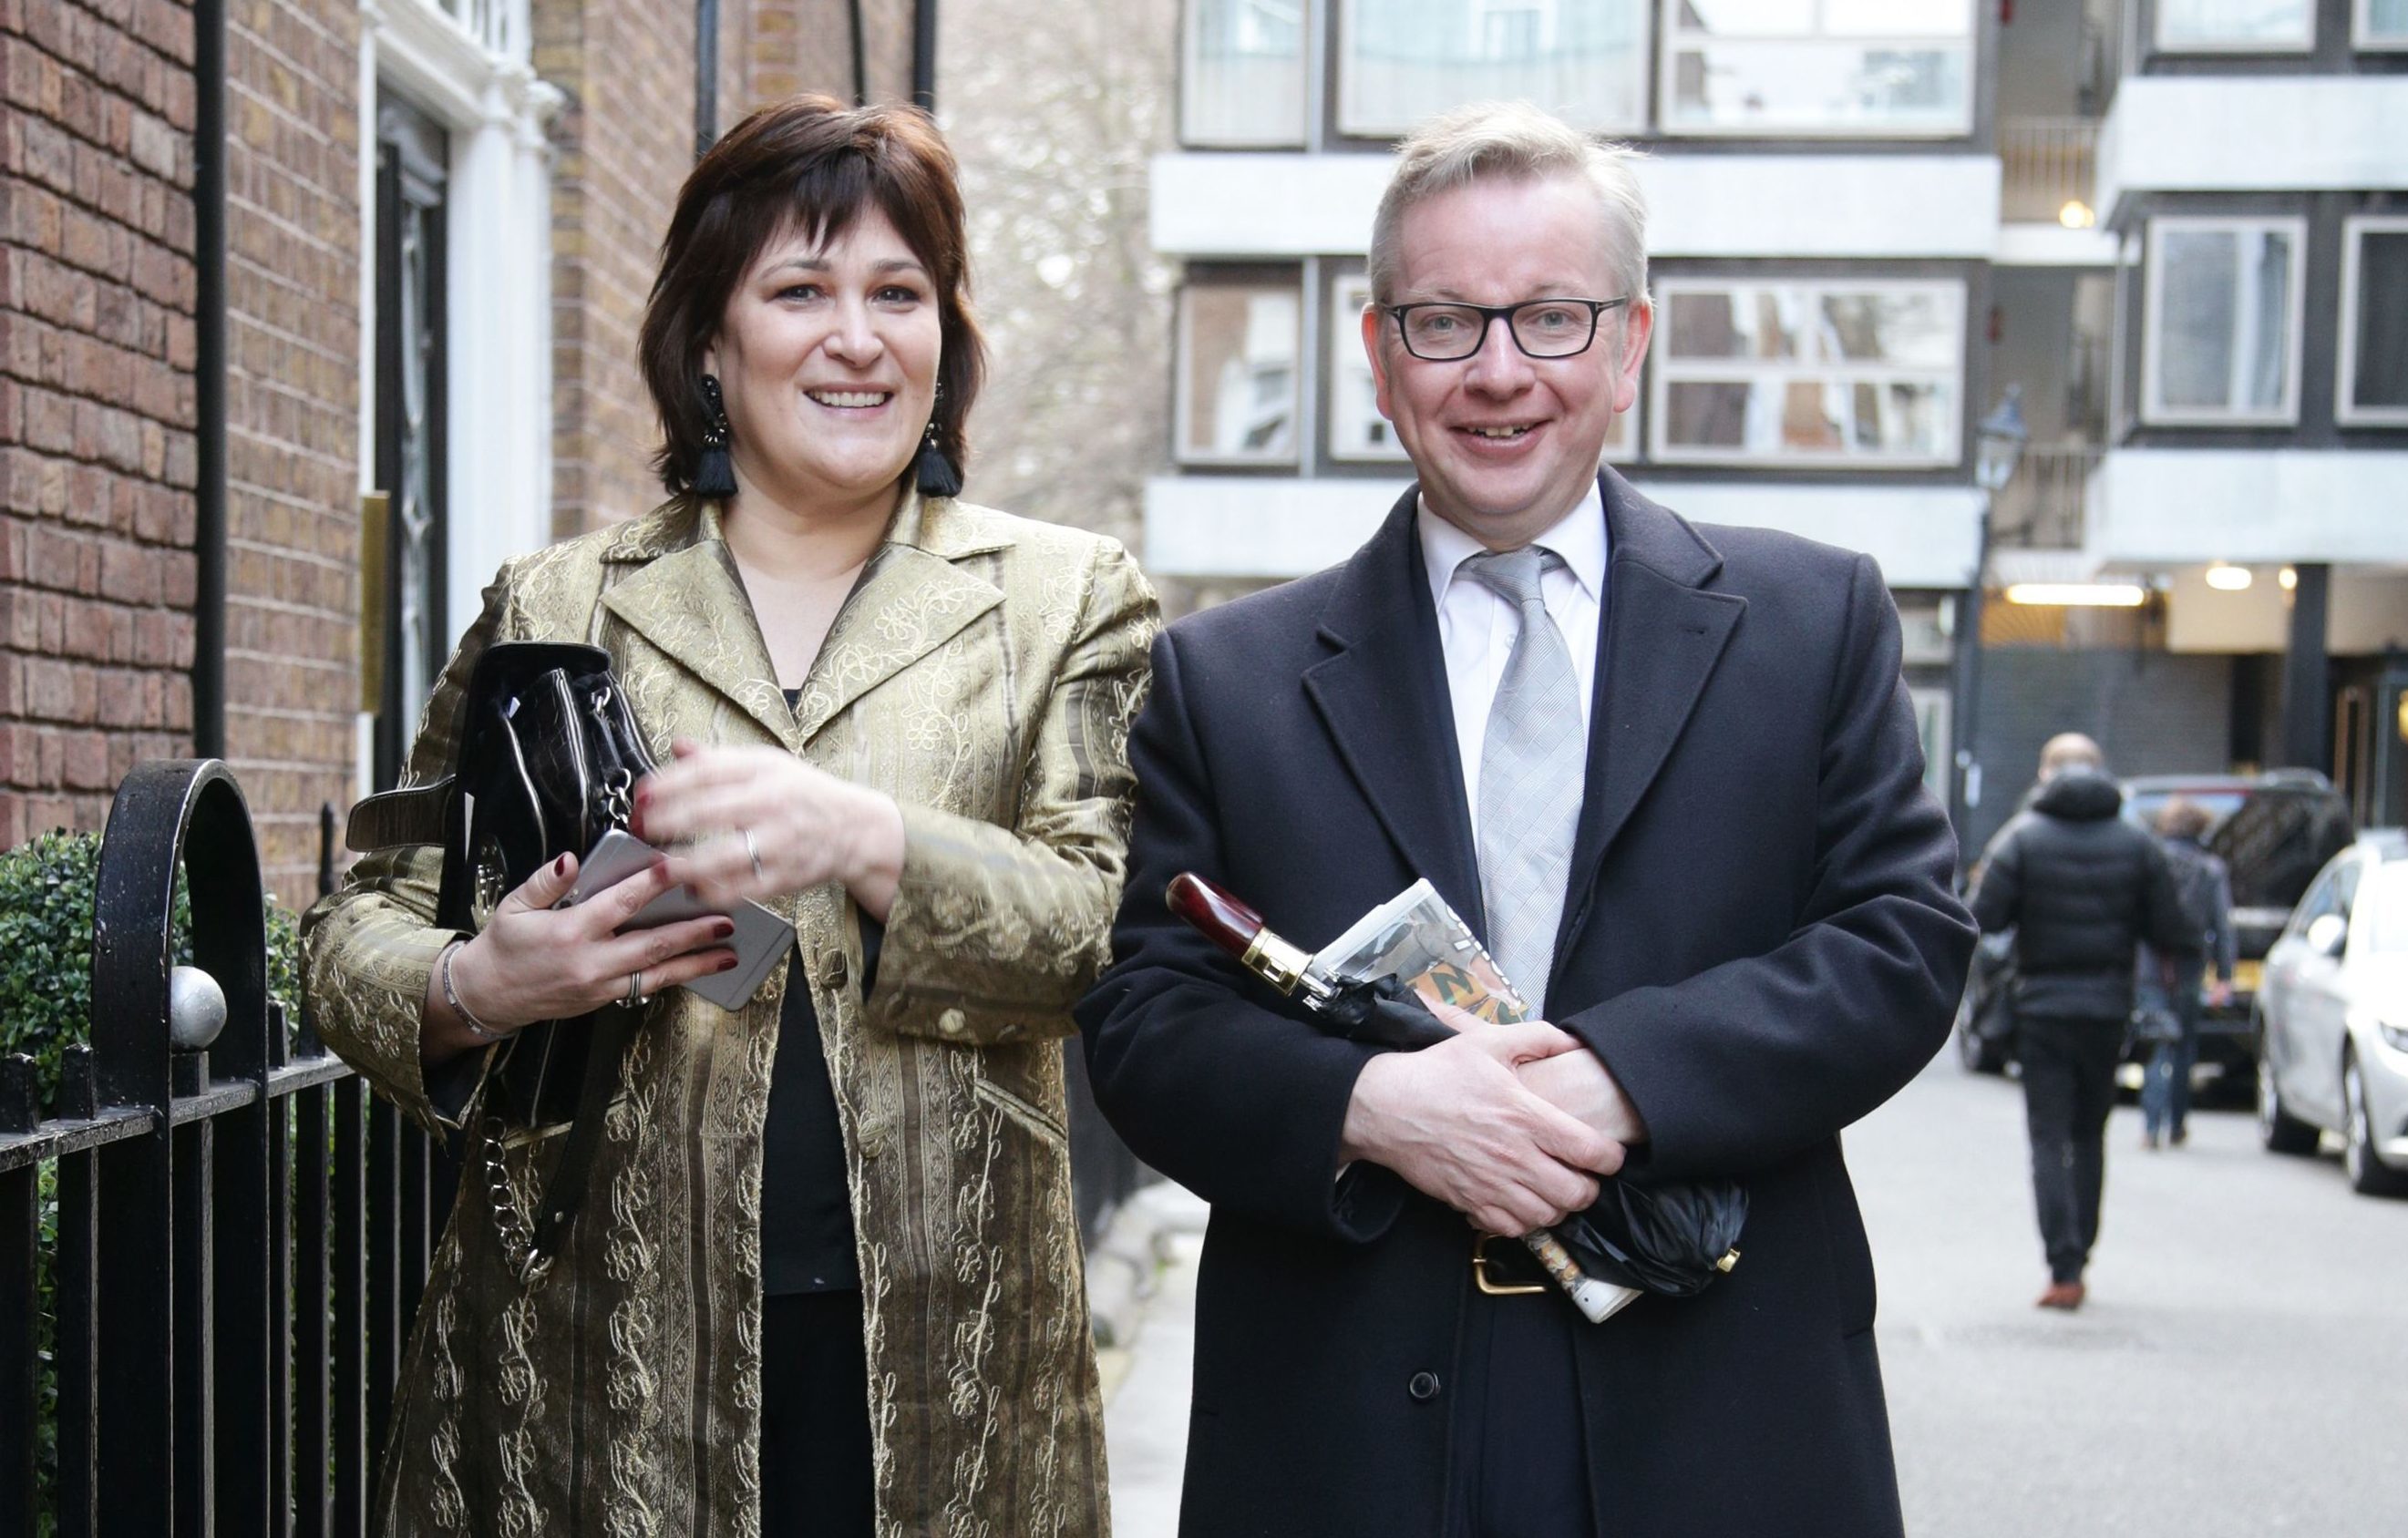 Michael Gove and his wife Sarah Vine, who left their young son at a bed and breakfast while they partied the night away with celebrities, it has been reported.